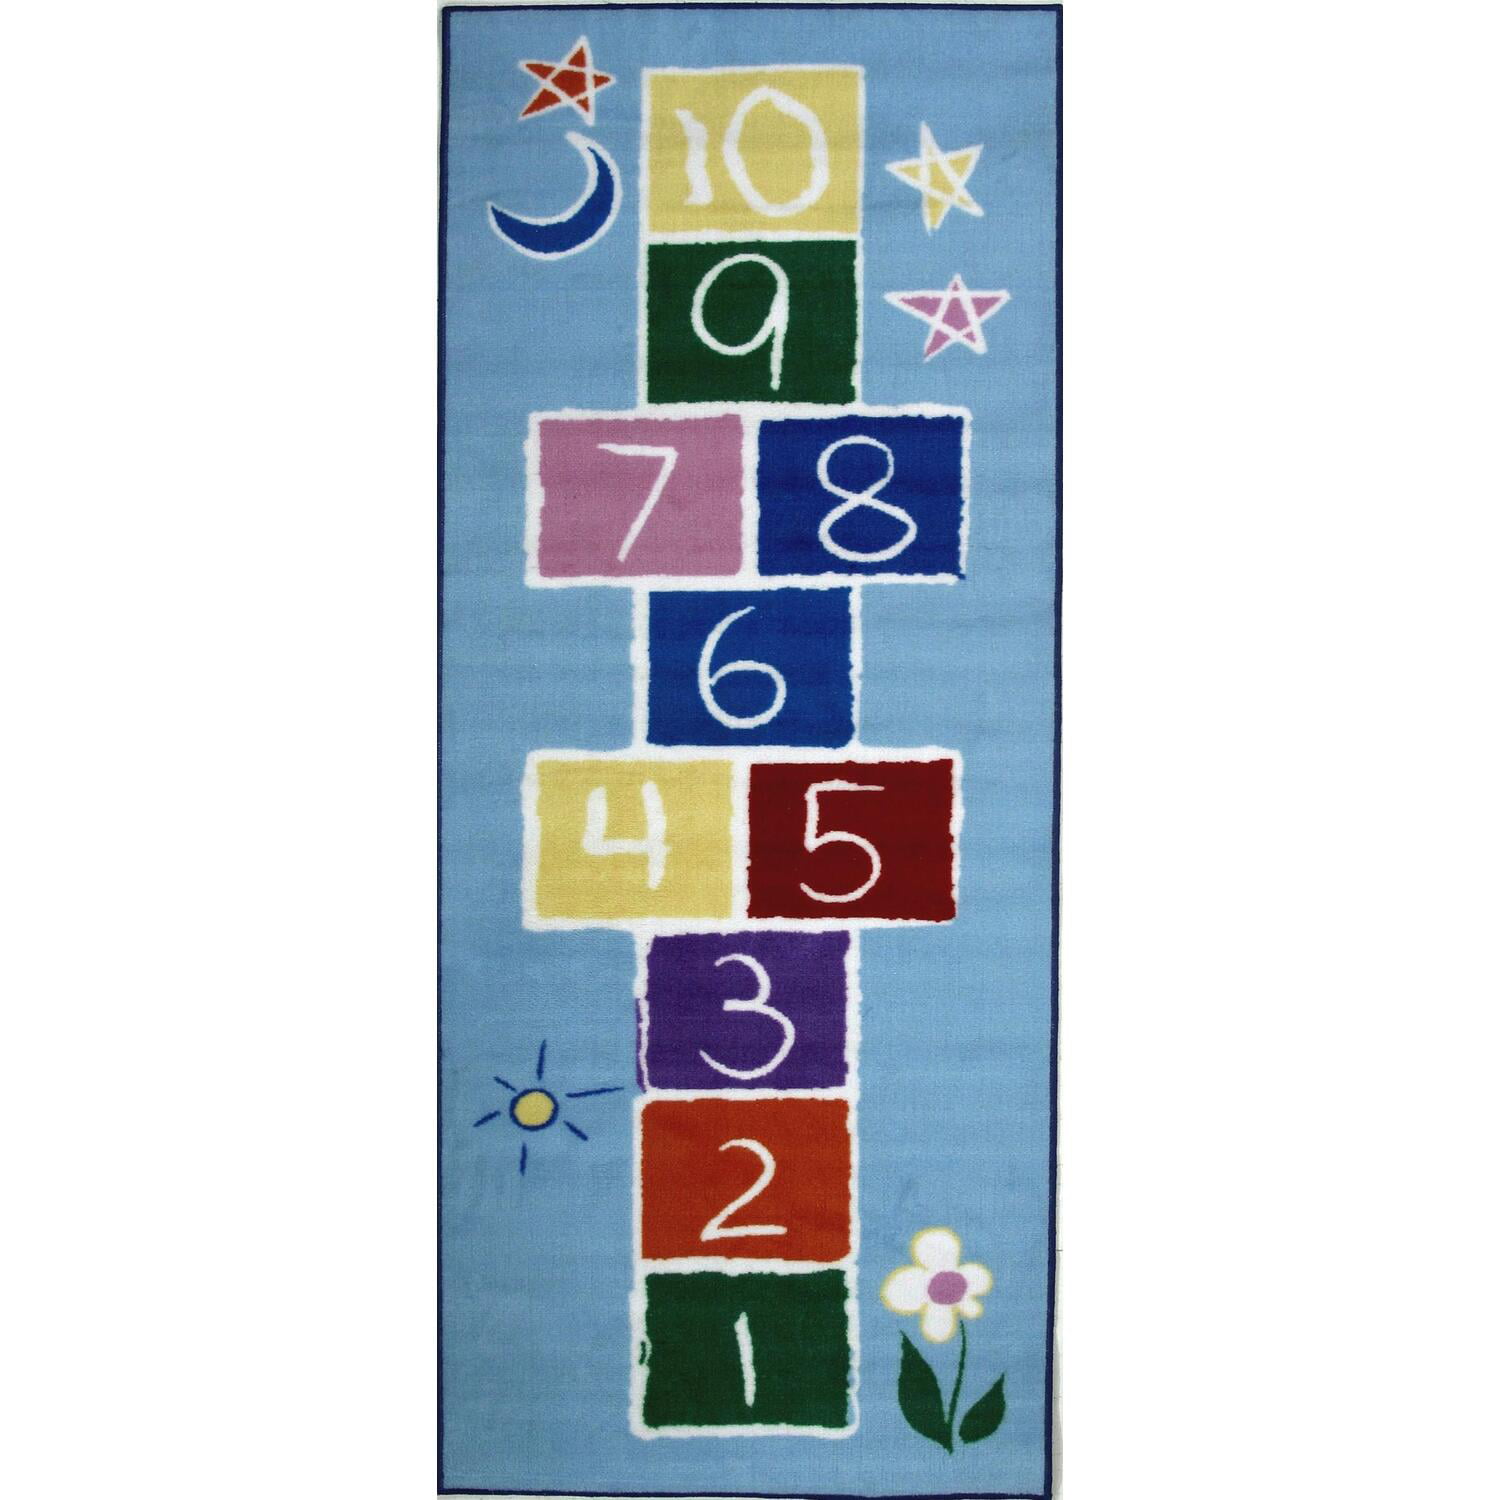 3x7 Educational Runner Rug  ABC Kids School Time  Numbers Train Play Hopscotch 